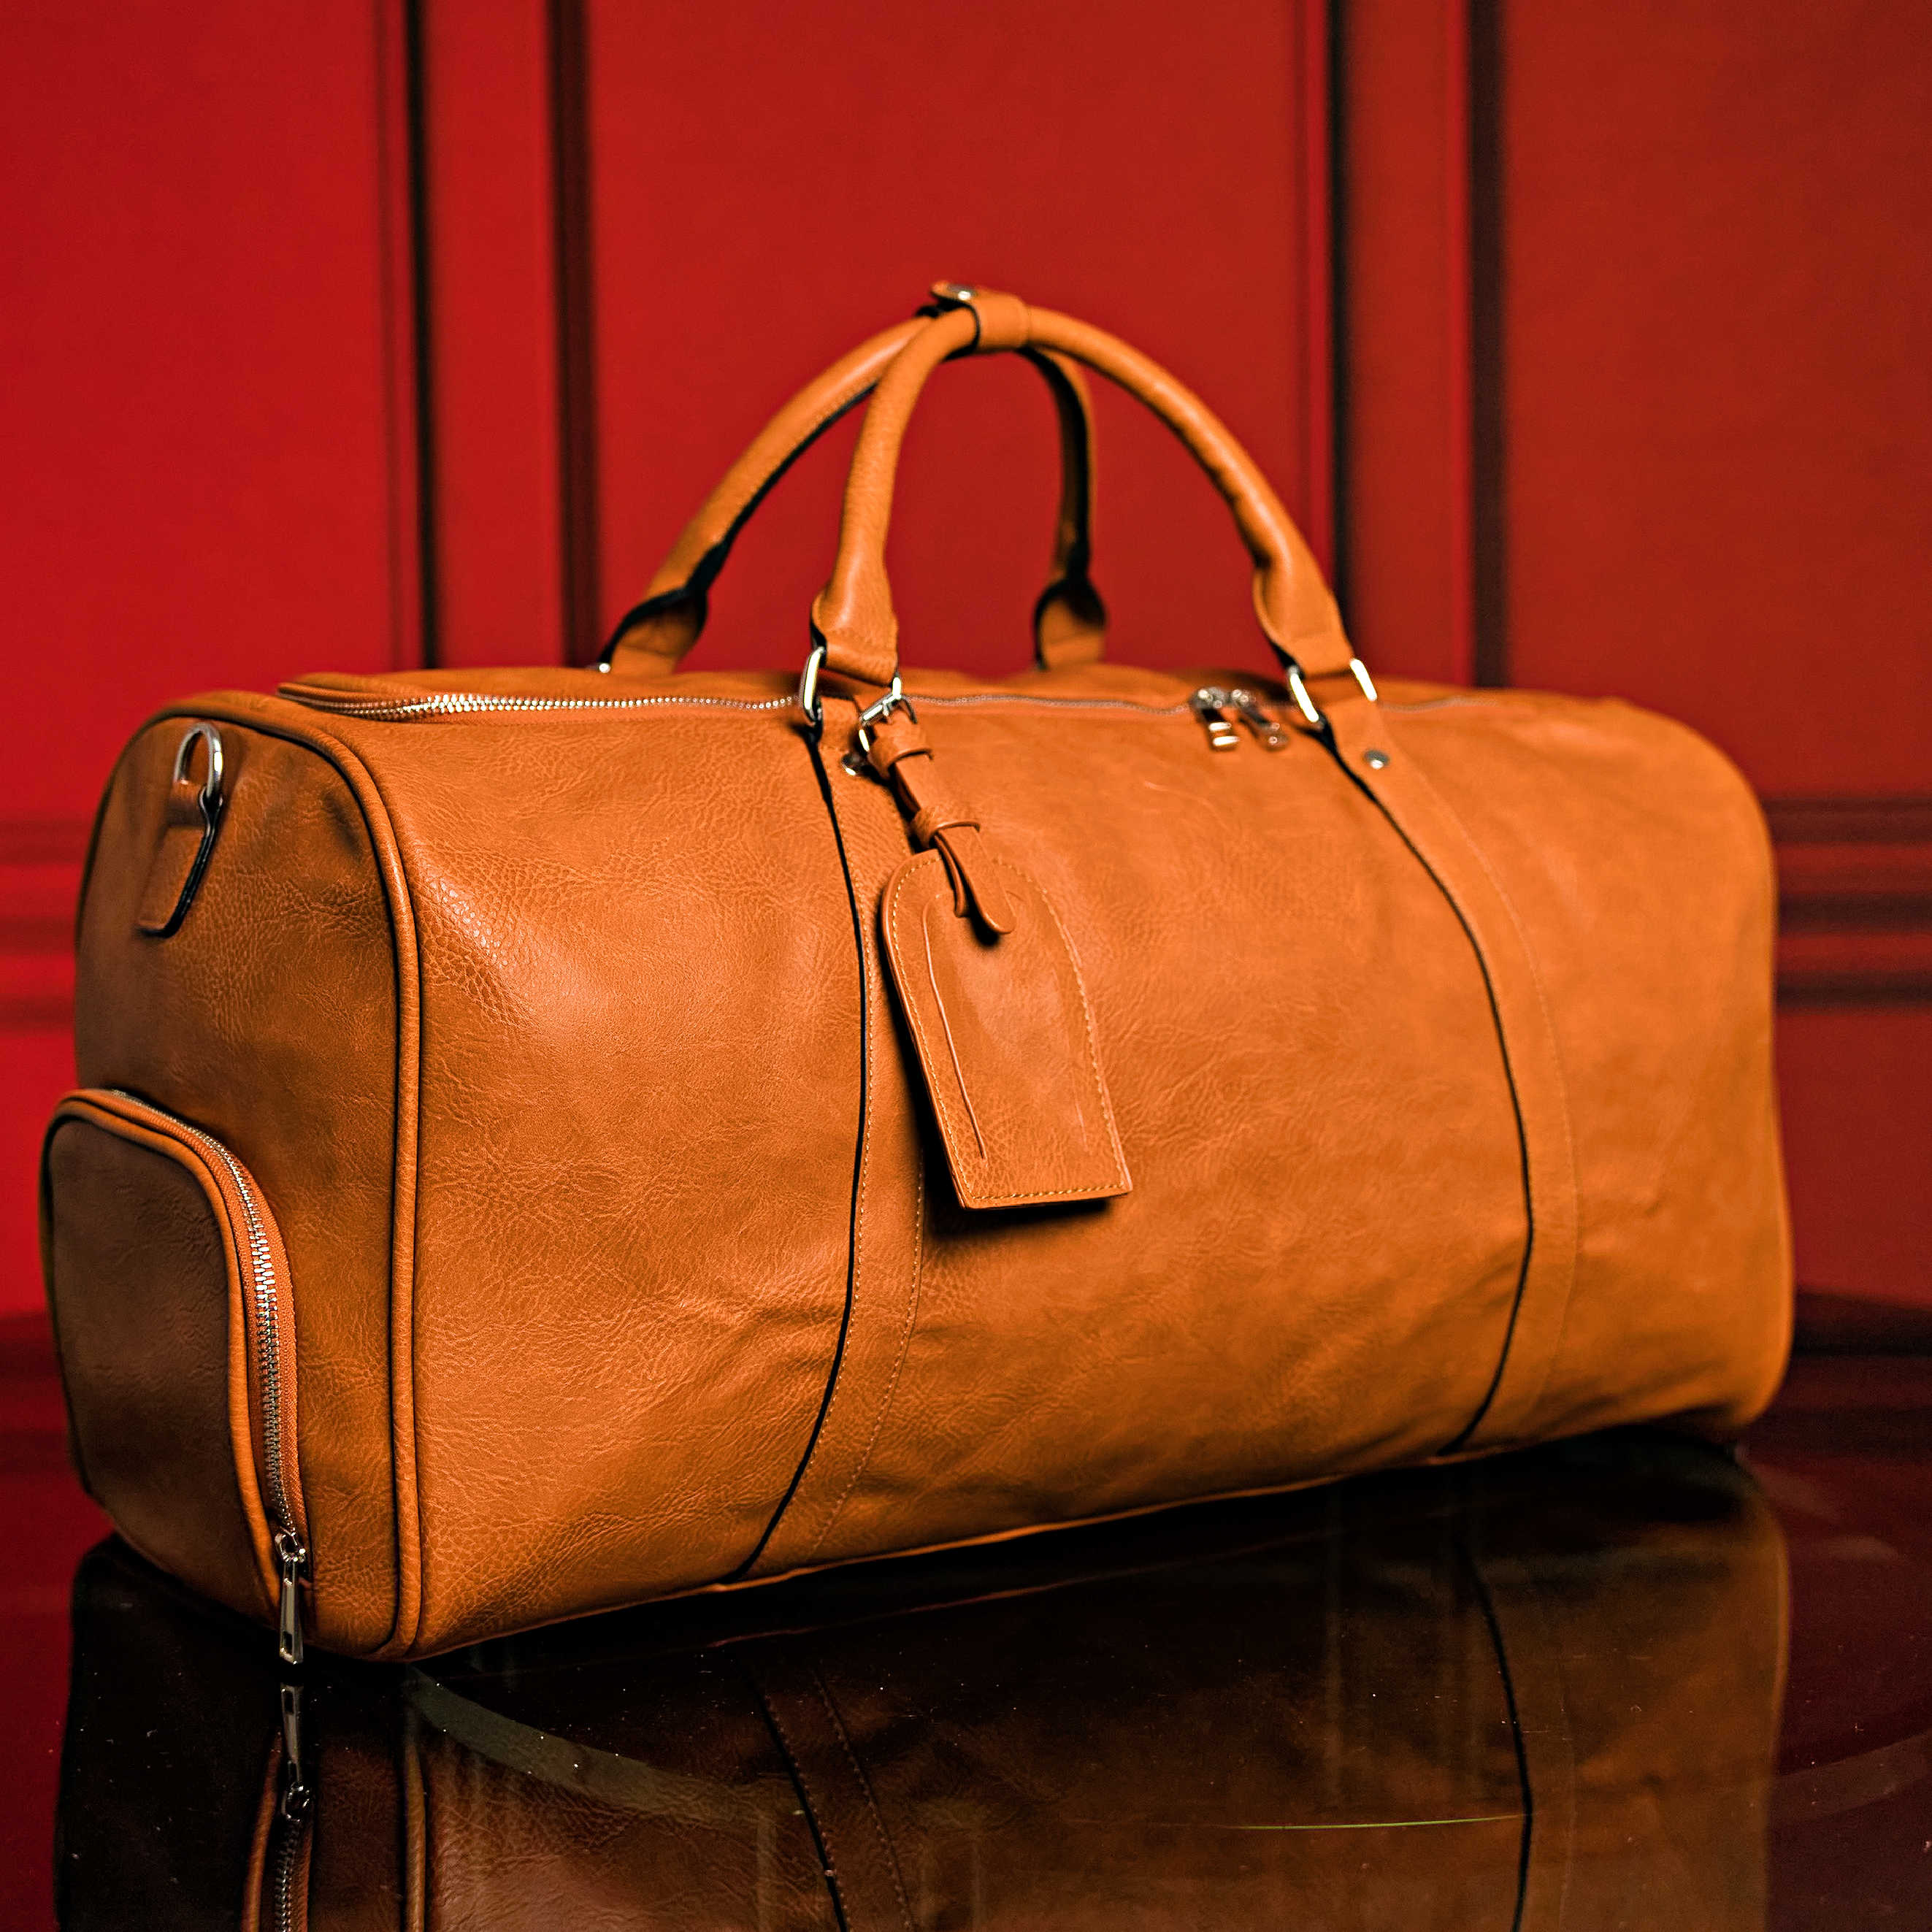 Brown Tumbled Leather 3 Bag Set - Sole Premise